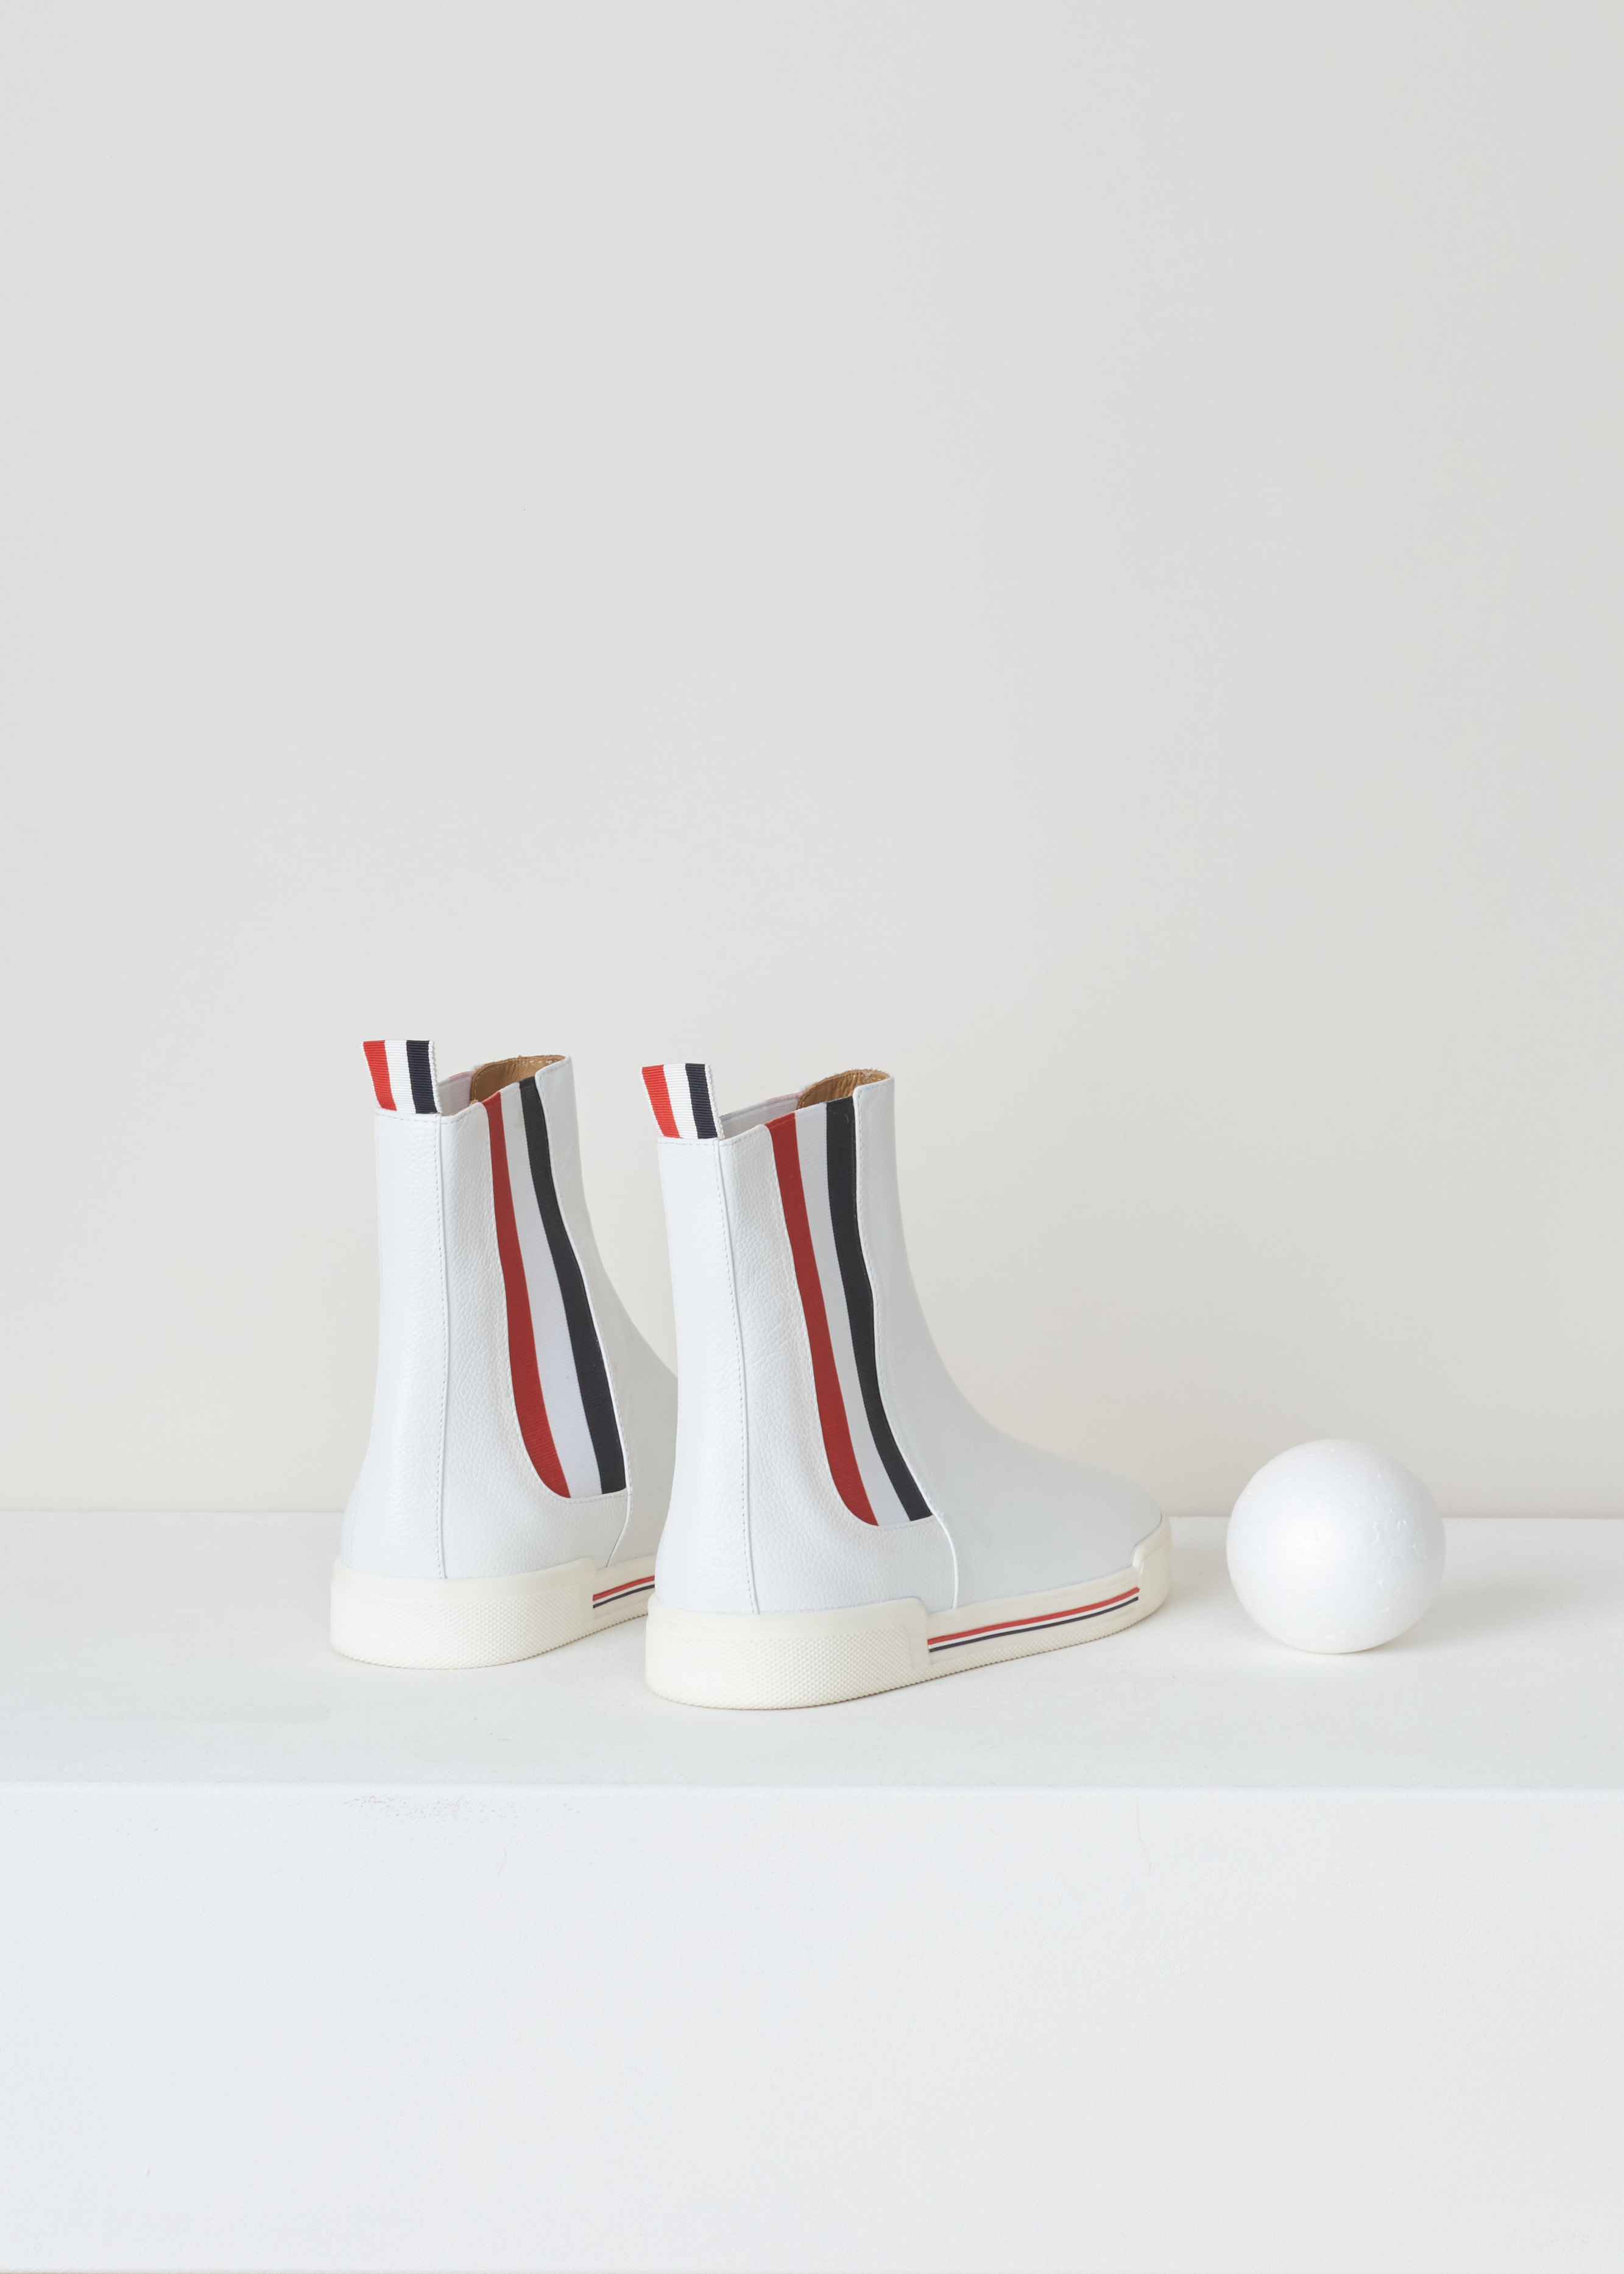 Thom Browne Chelsea boot sneaker white FFB056B_03542_100 white back. White leather chelsea boot with red and blue striped elastic side panels, a rounded toe, a pull tab at the back and a white rubber sole with red and blue detailing. 